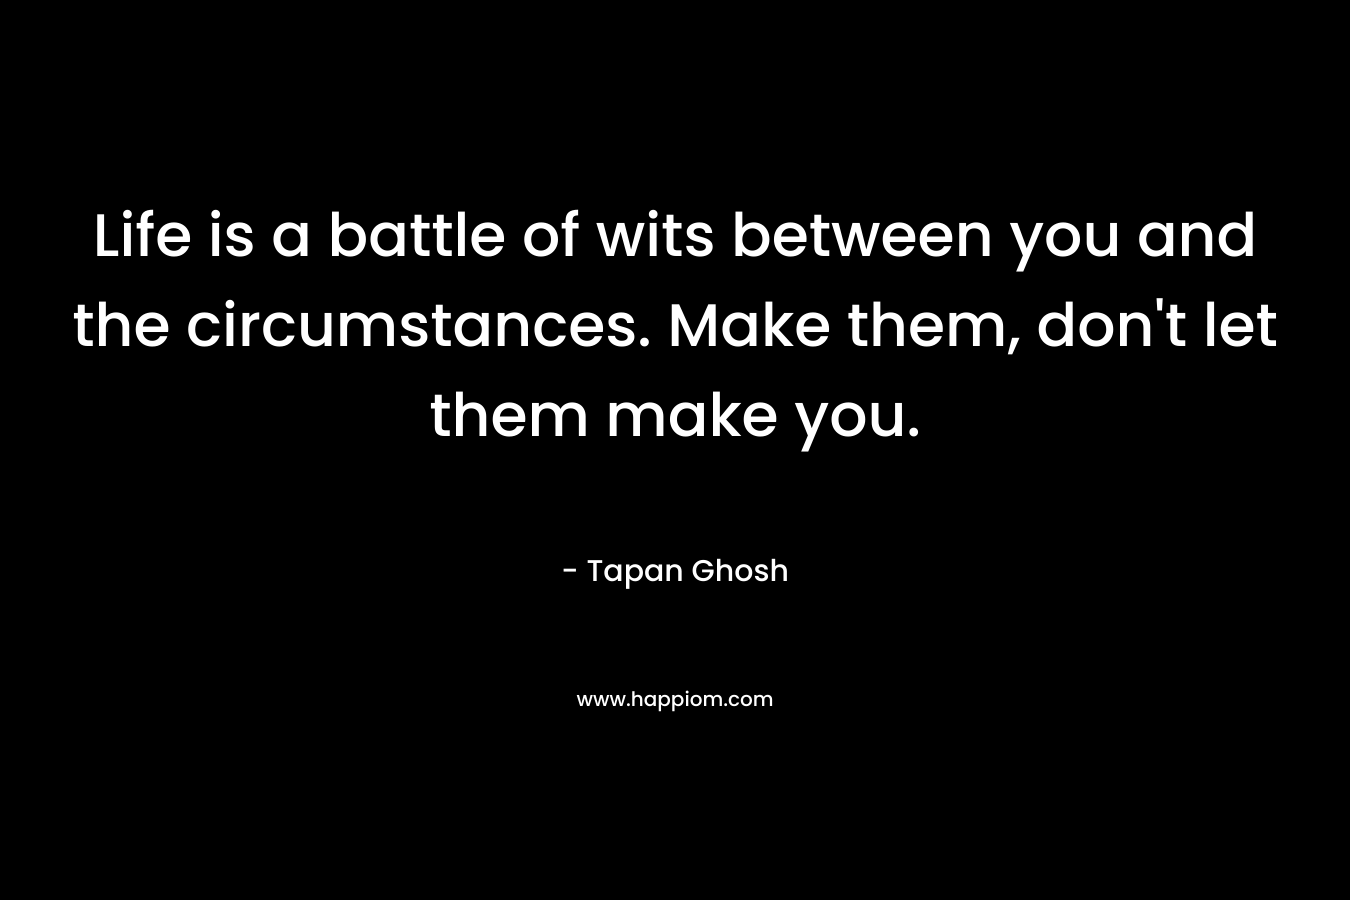 Life is a battle of wits between you and the circumstances. Make them, don't let them make you.